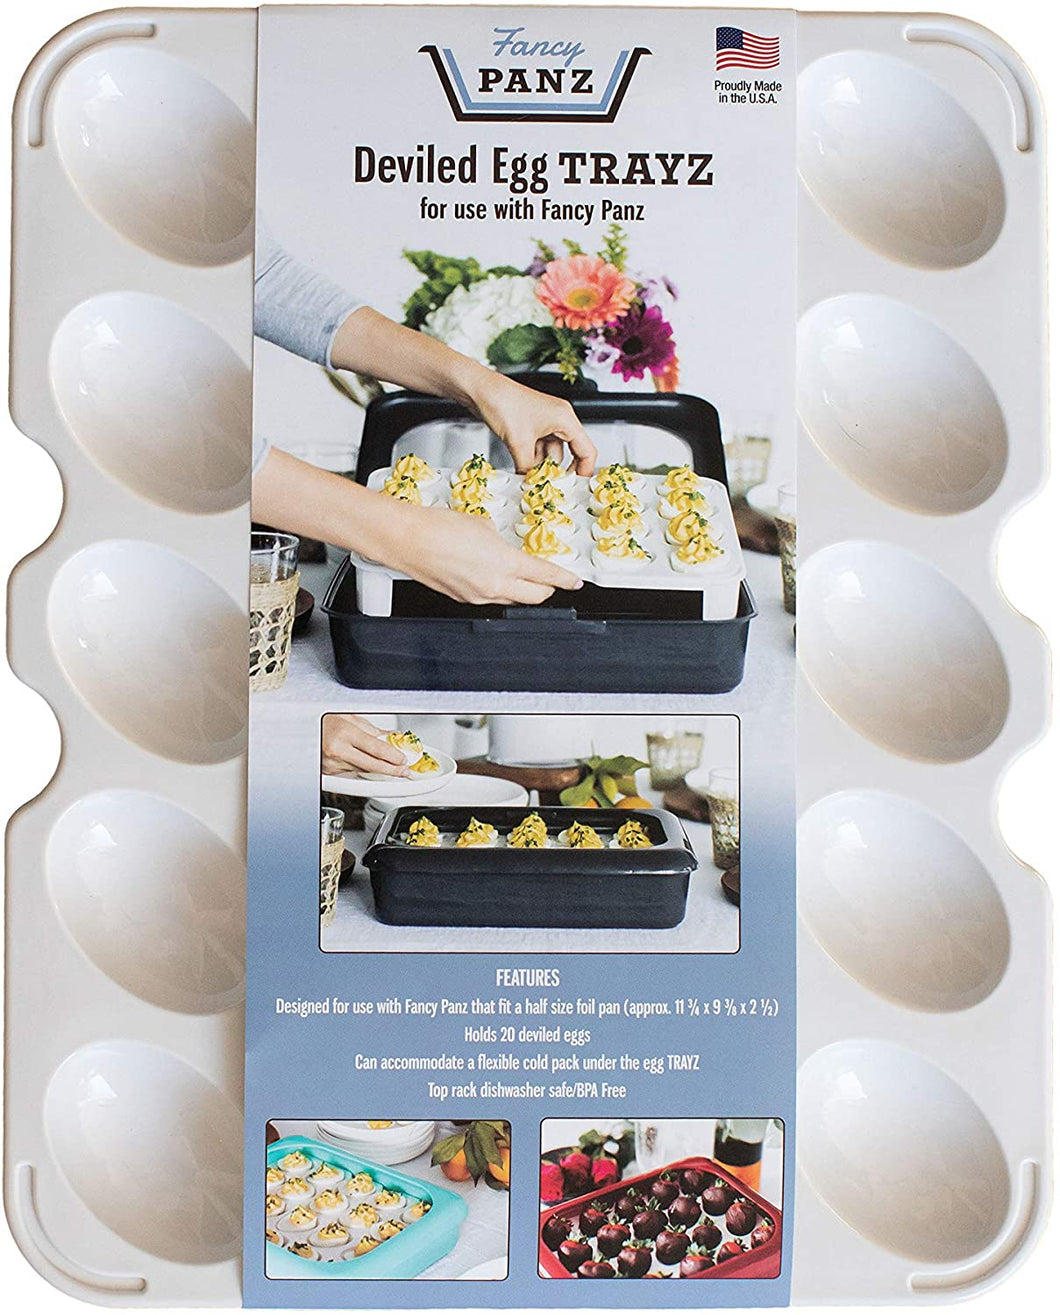 Egg Tray Insert For Fancy Panz